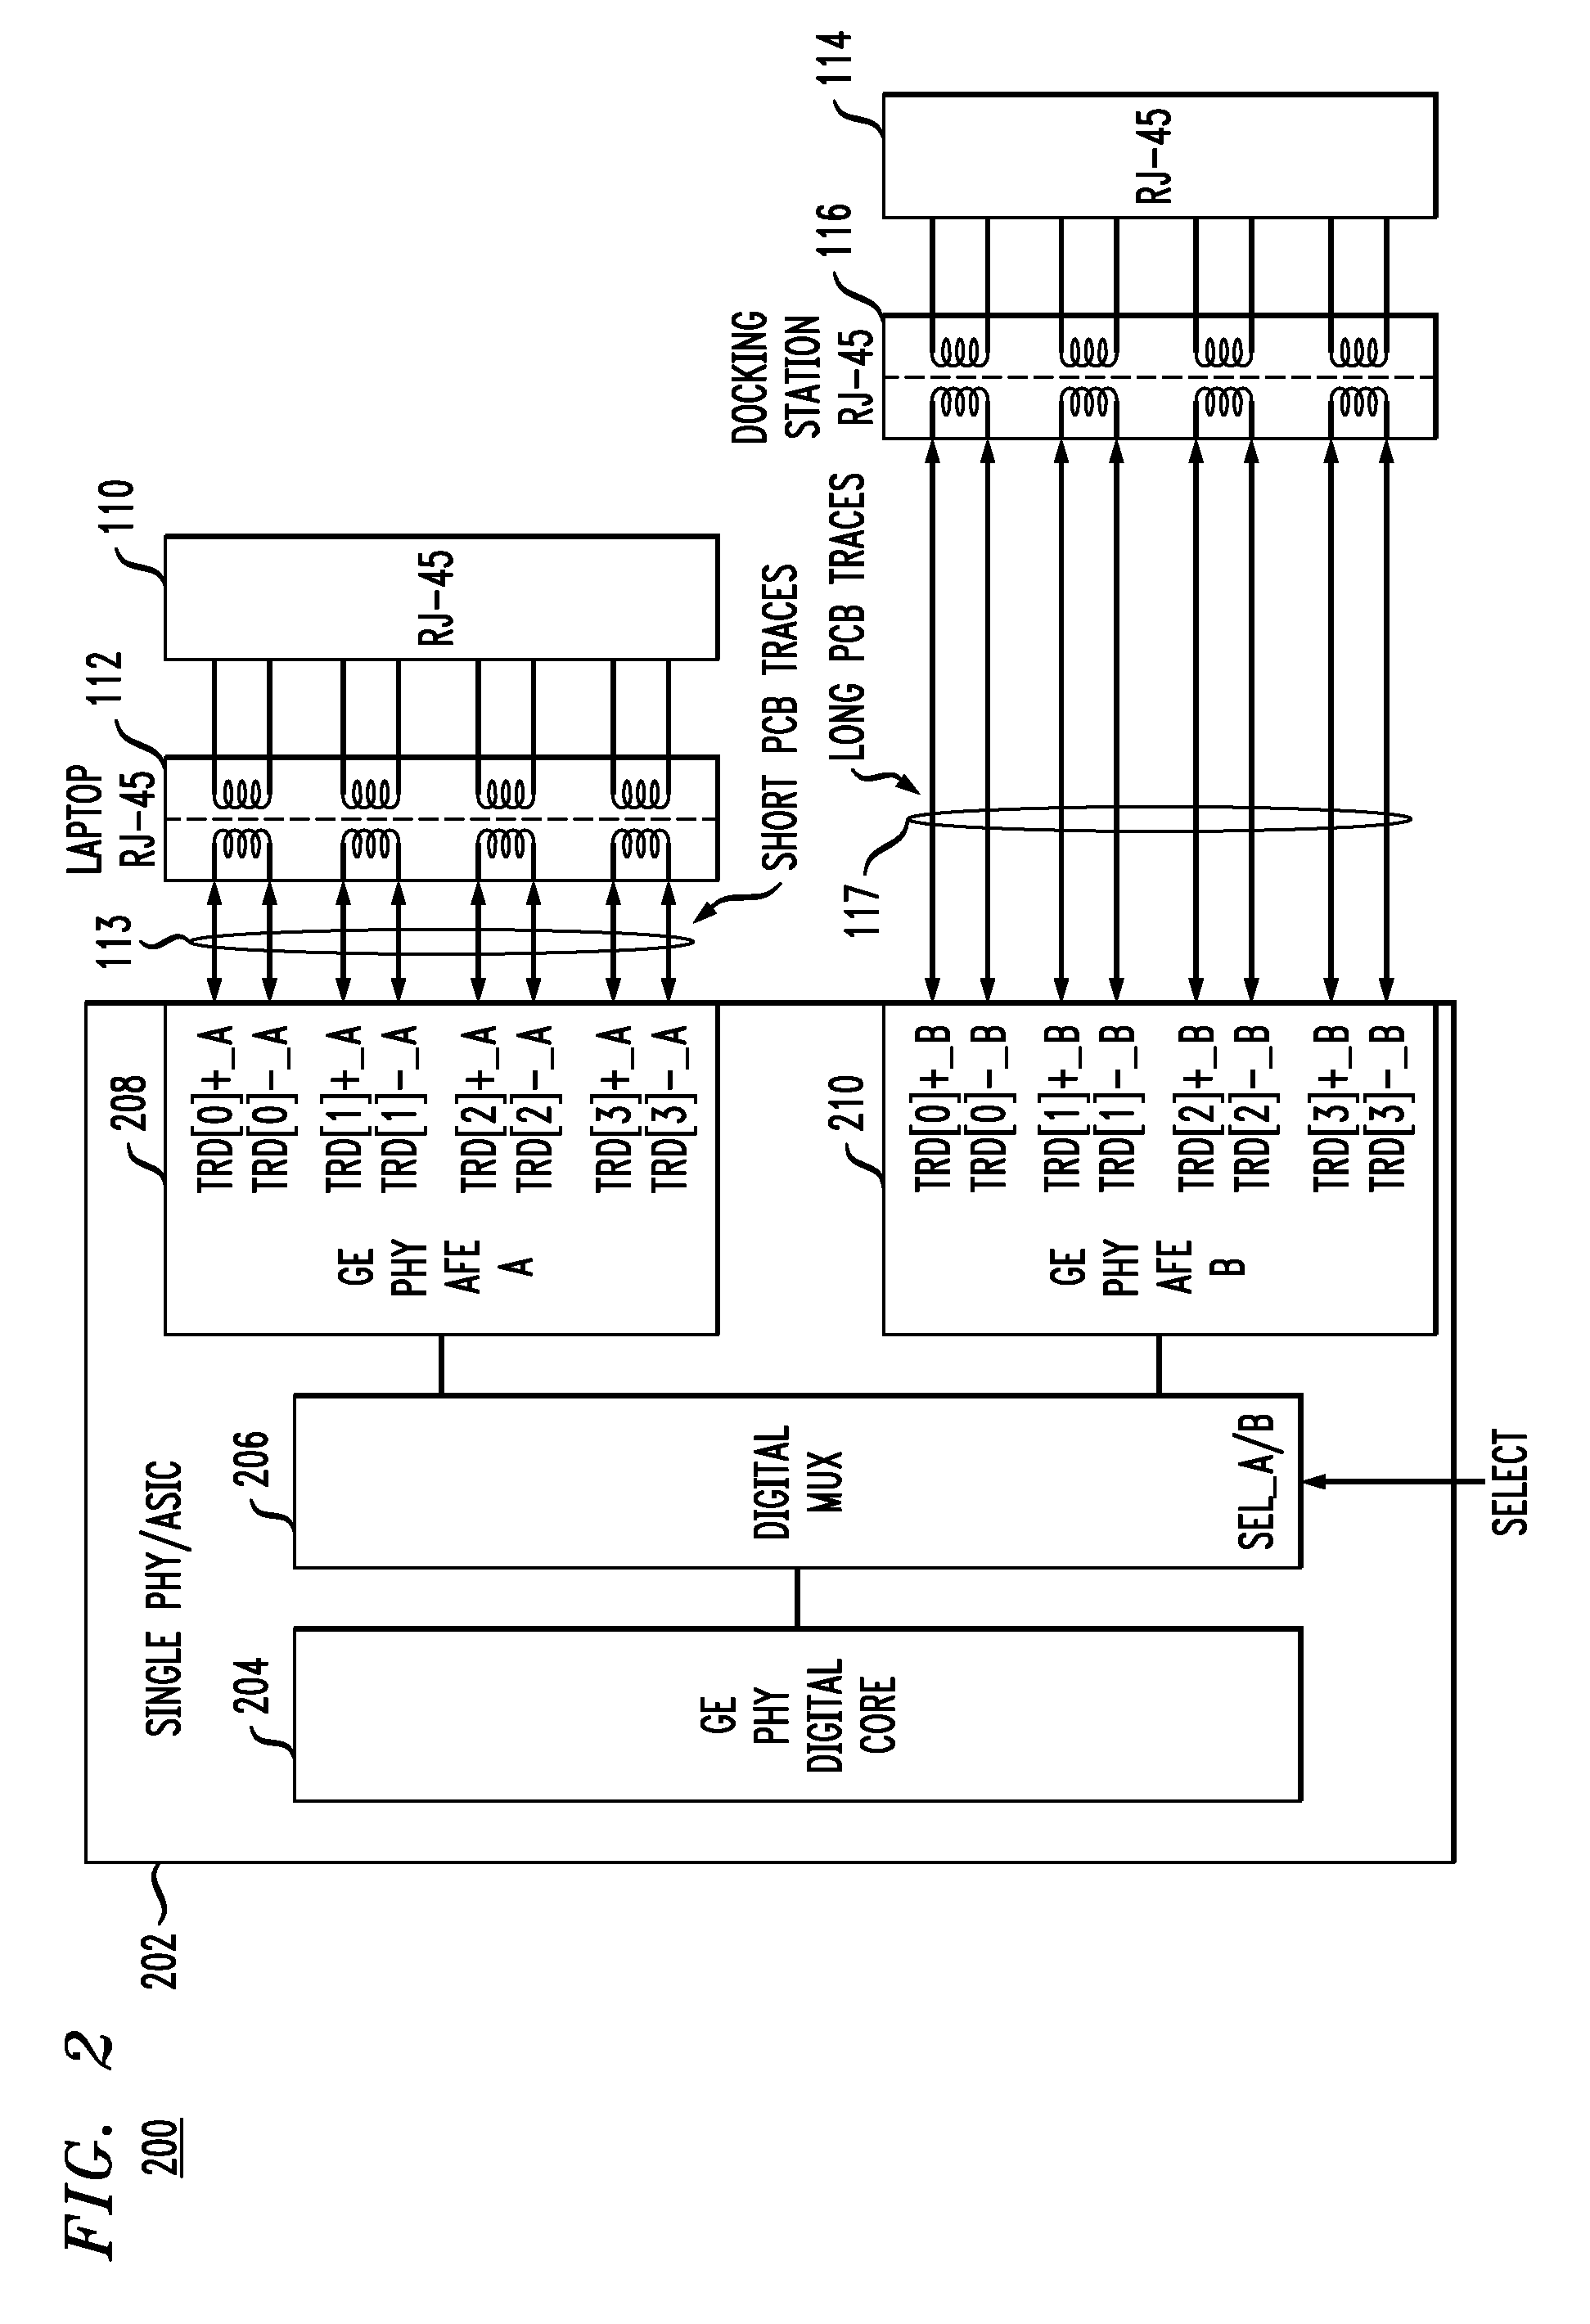 Physical Layer Interface for Computing Devices